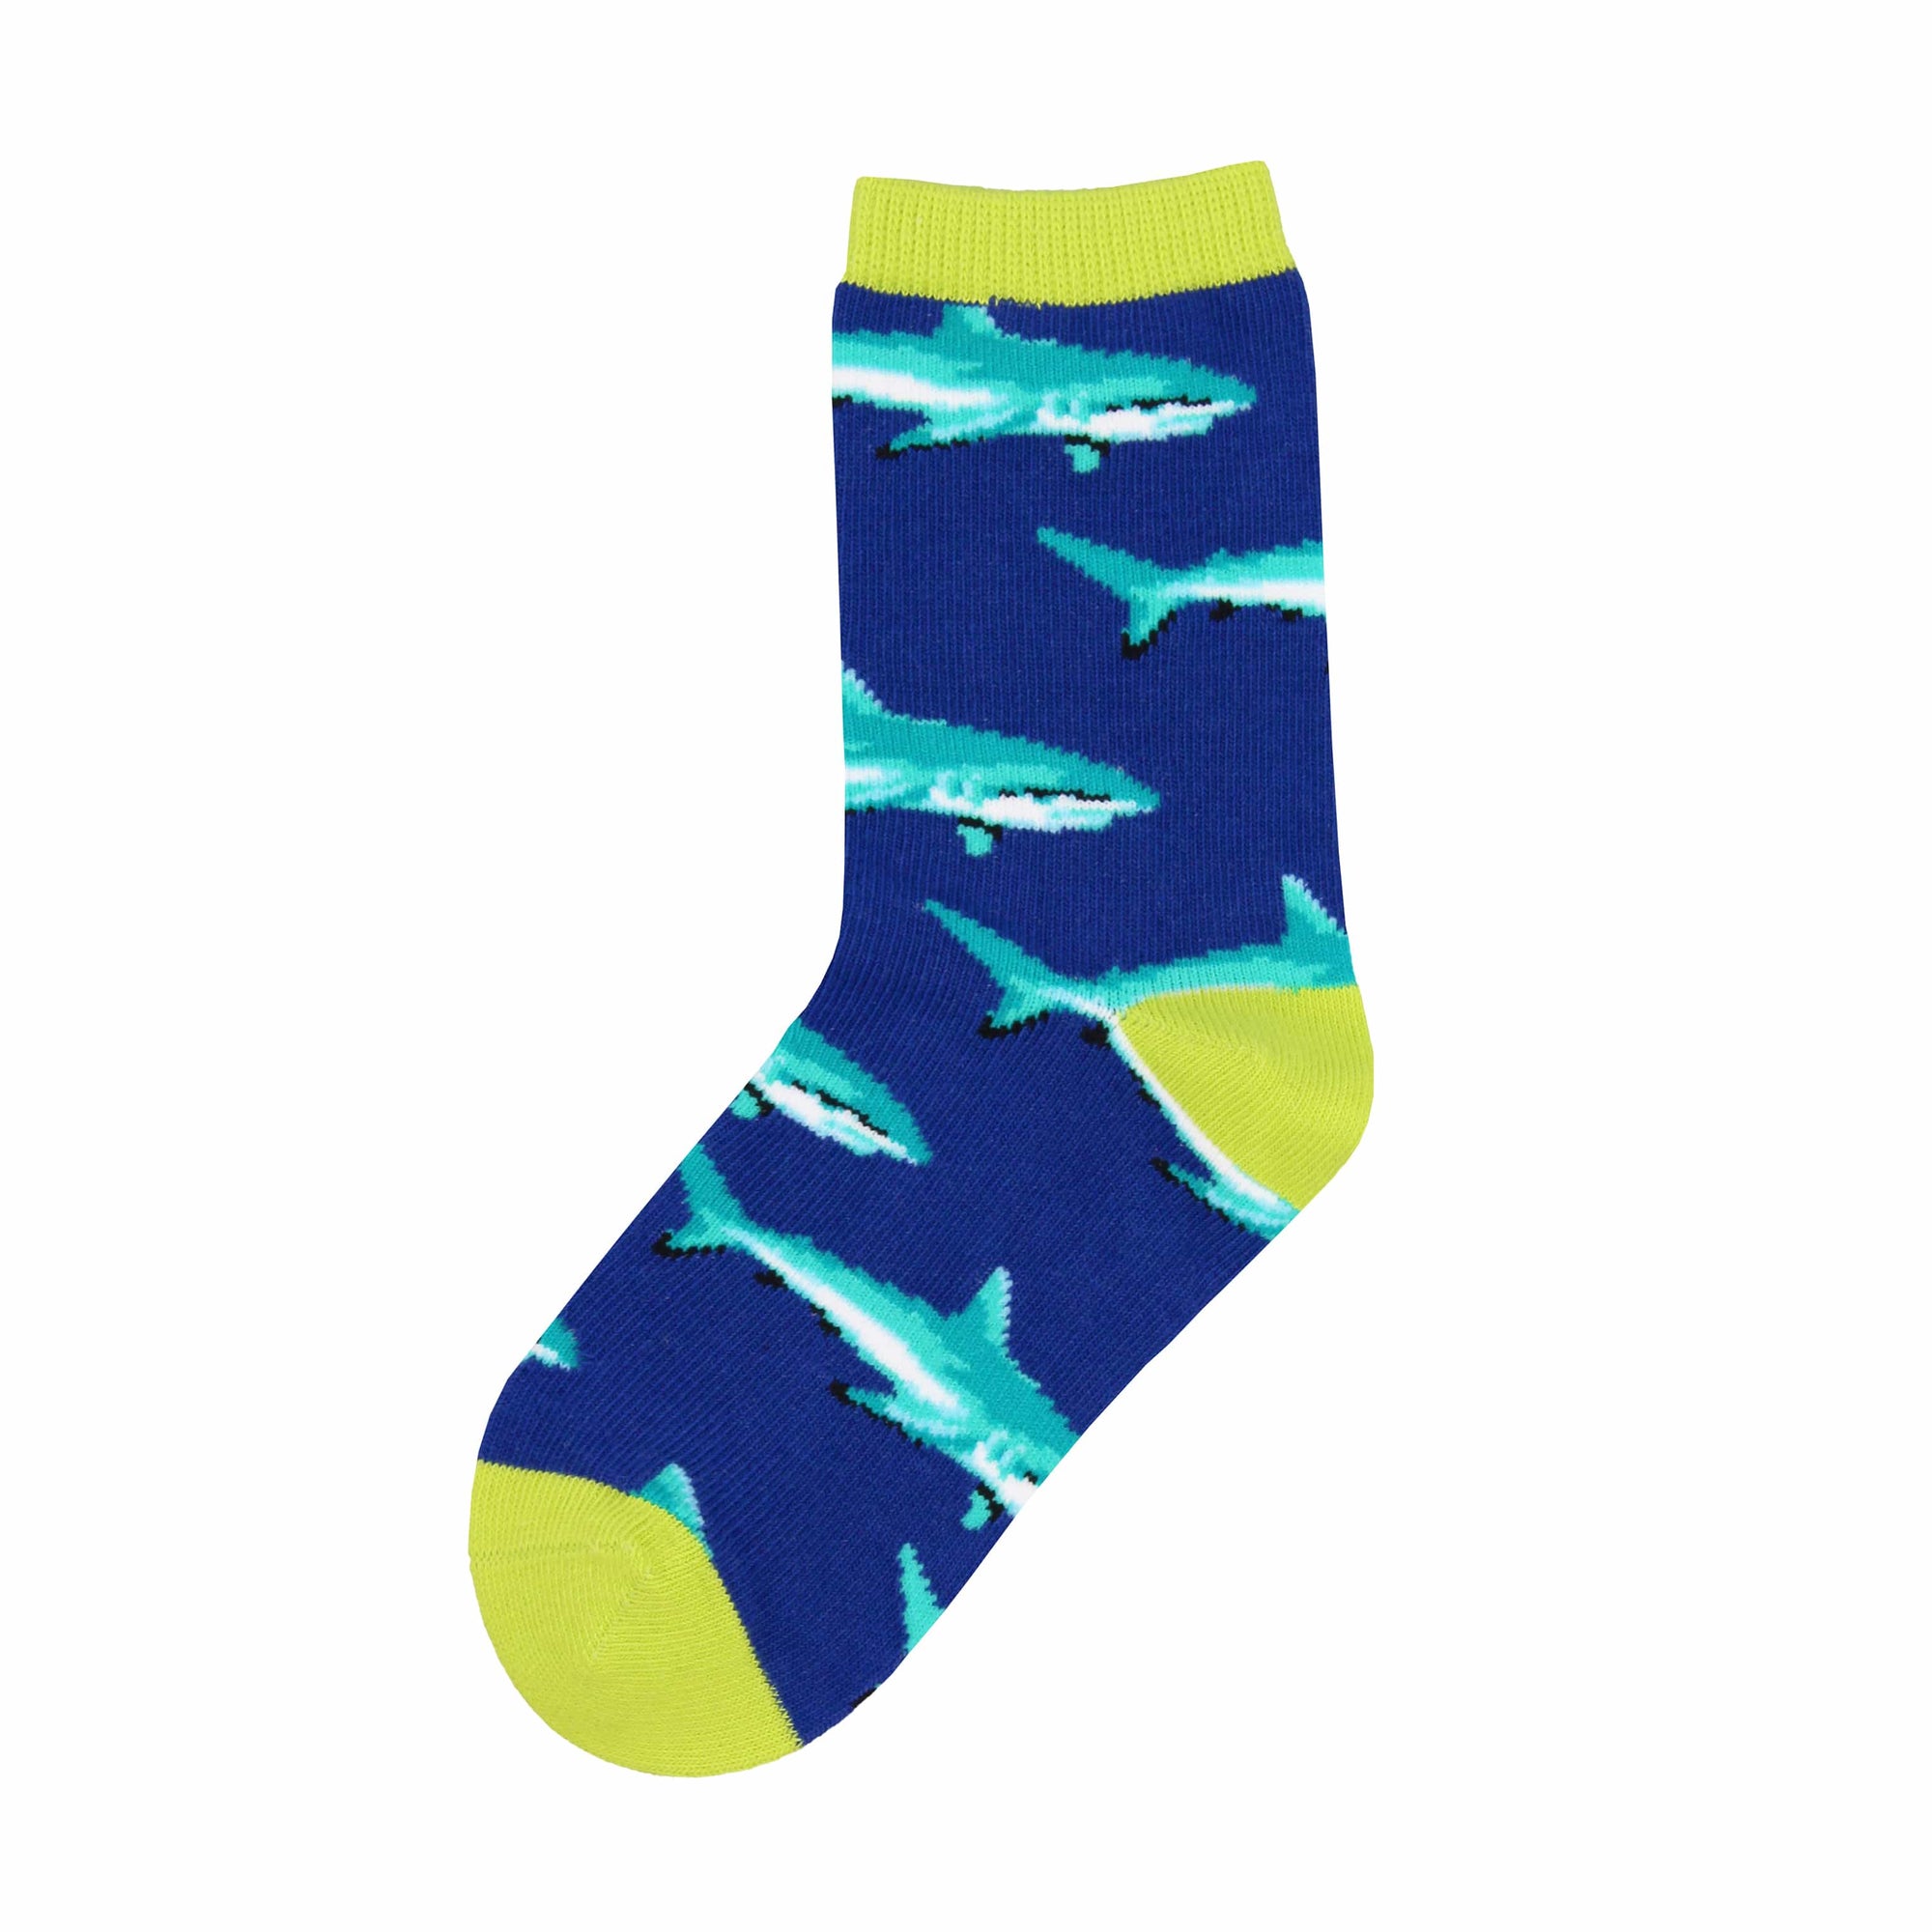 Help your kid impress those school chums with these shark socks for children.